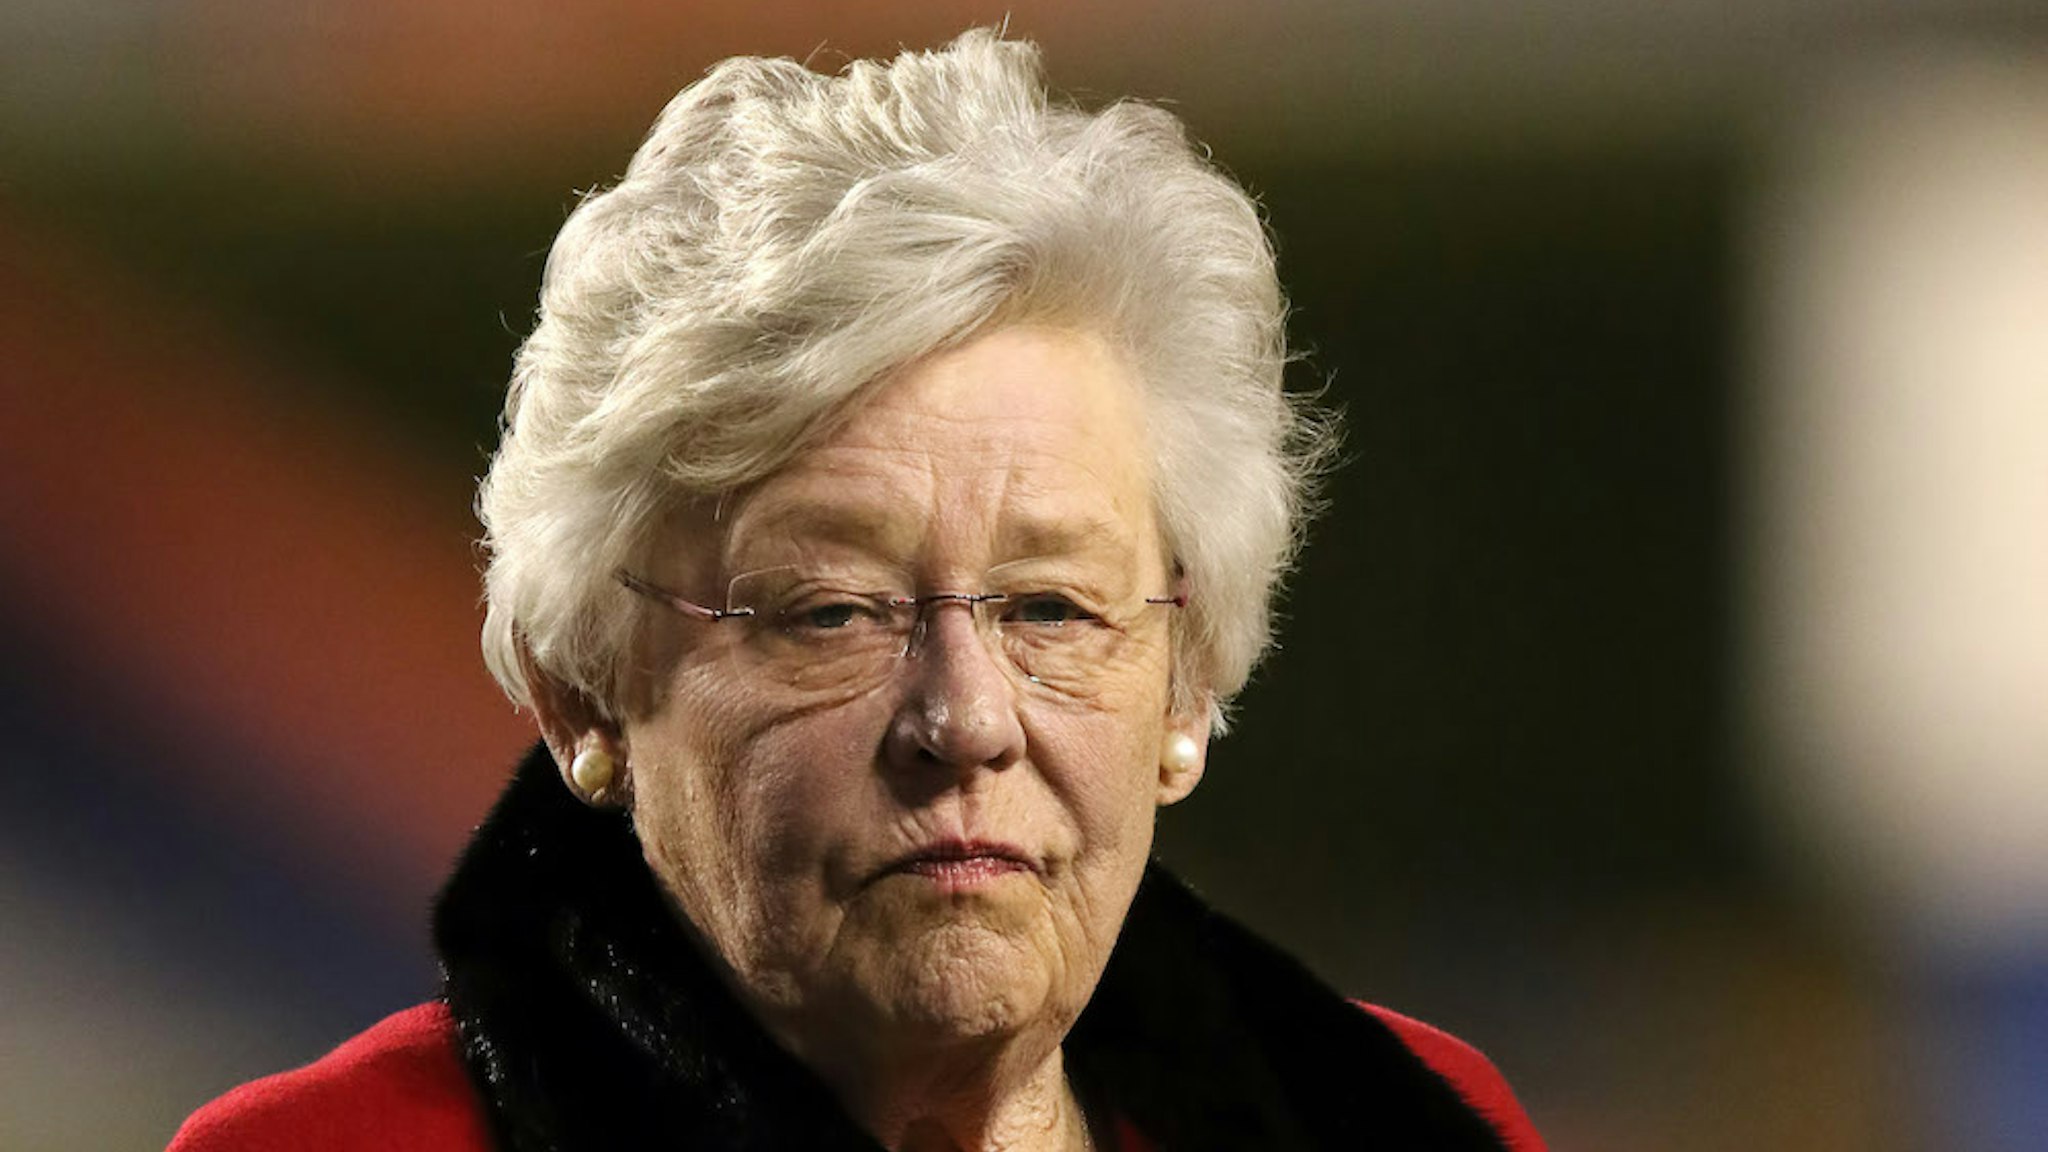 AUBURN, AL - DECEMBER 04: Alabama Governor Kay Ivey is presented with an award at the Alabama 7A State Championship game between the Thompson Warriors and Central-Phenix City Red Devils on December 4, 2019 at Jordan-Hare Stadium in Auburn, Alabama. (Photo by Michael Wade/Icon Sportswire)